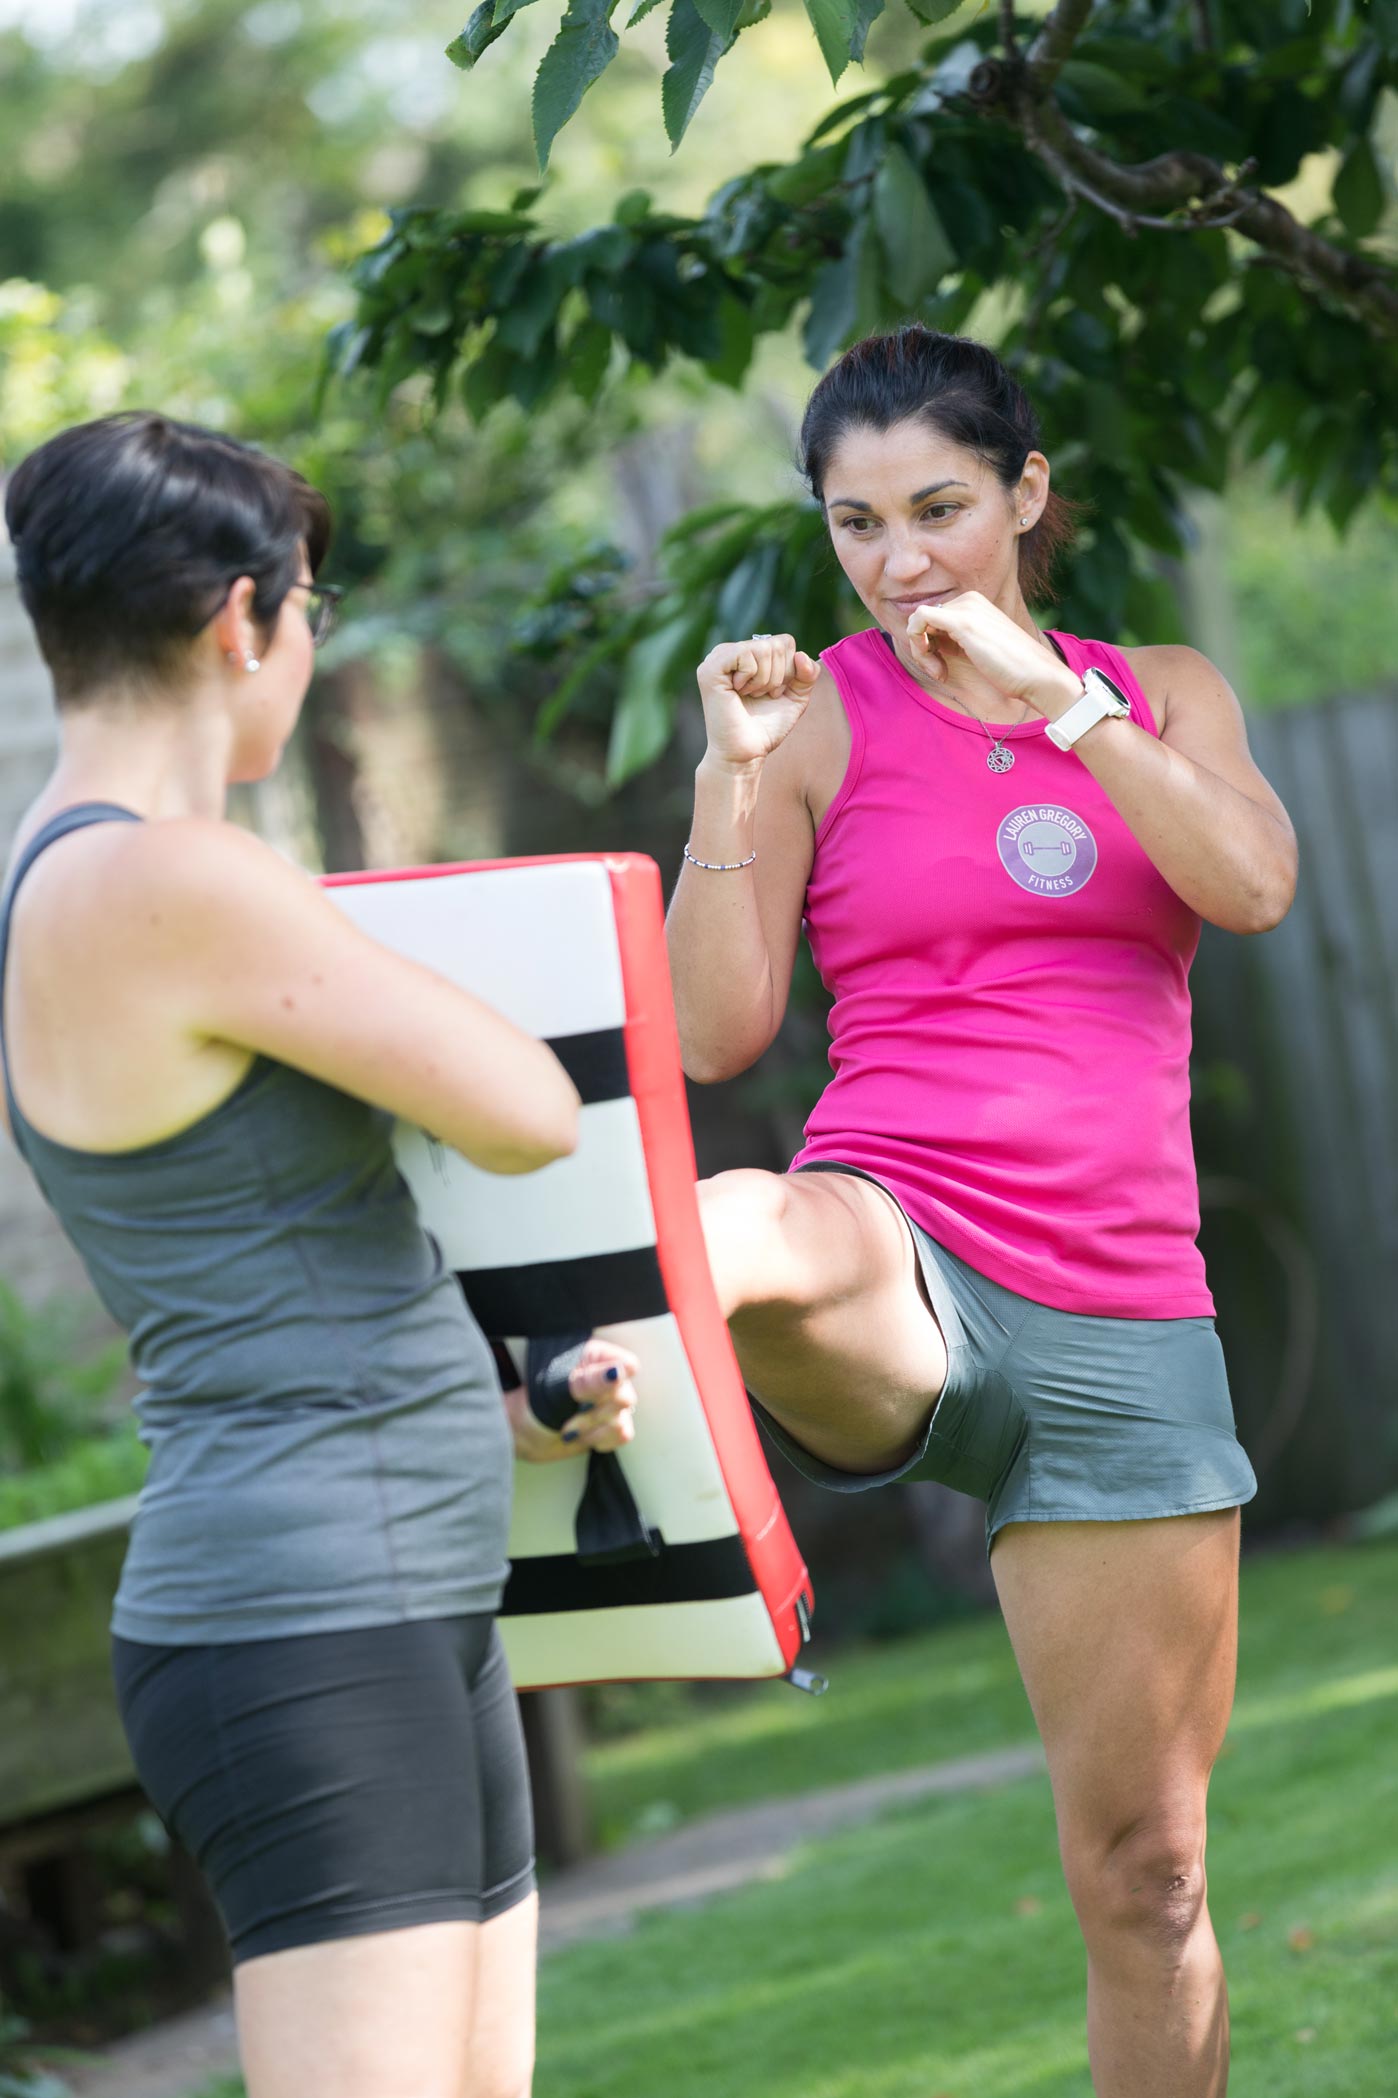 A female personal trainer practices kickboxing with a client during a health & fitness personal branding photography shoot in London